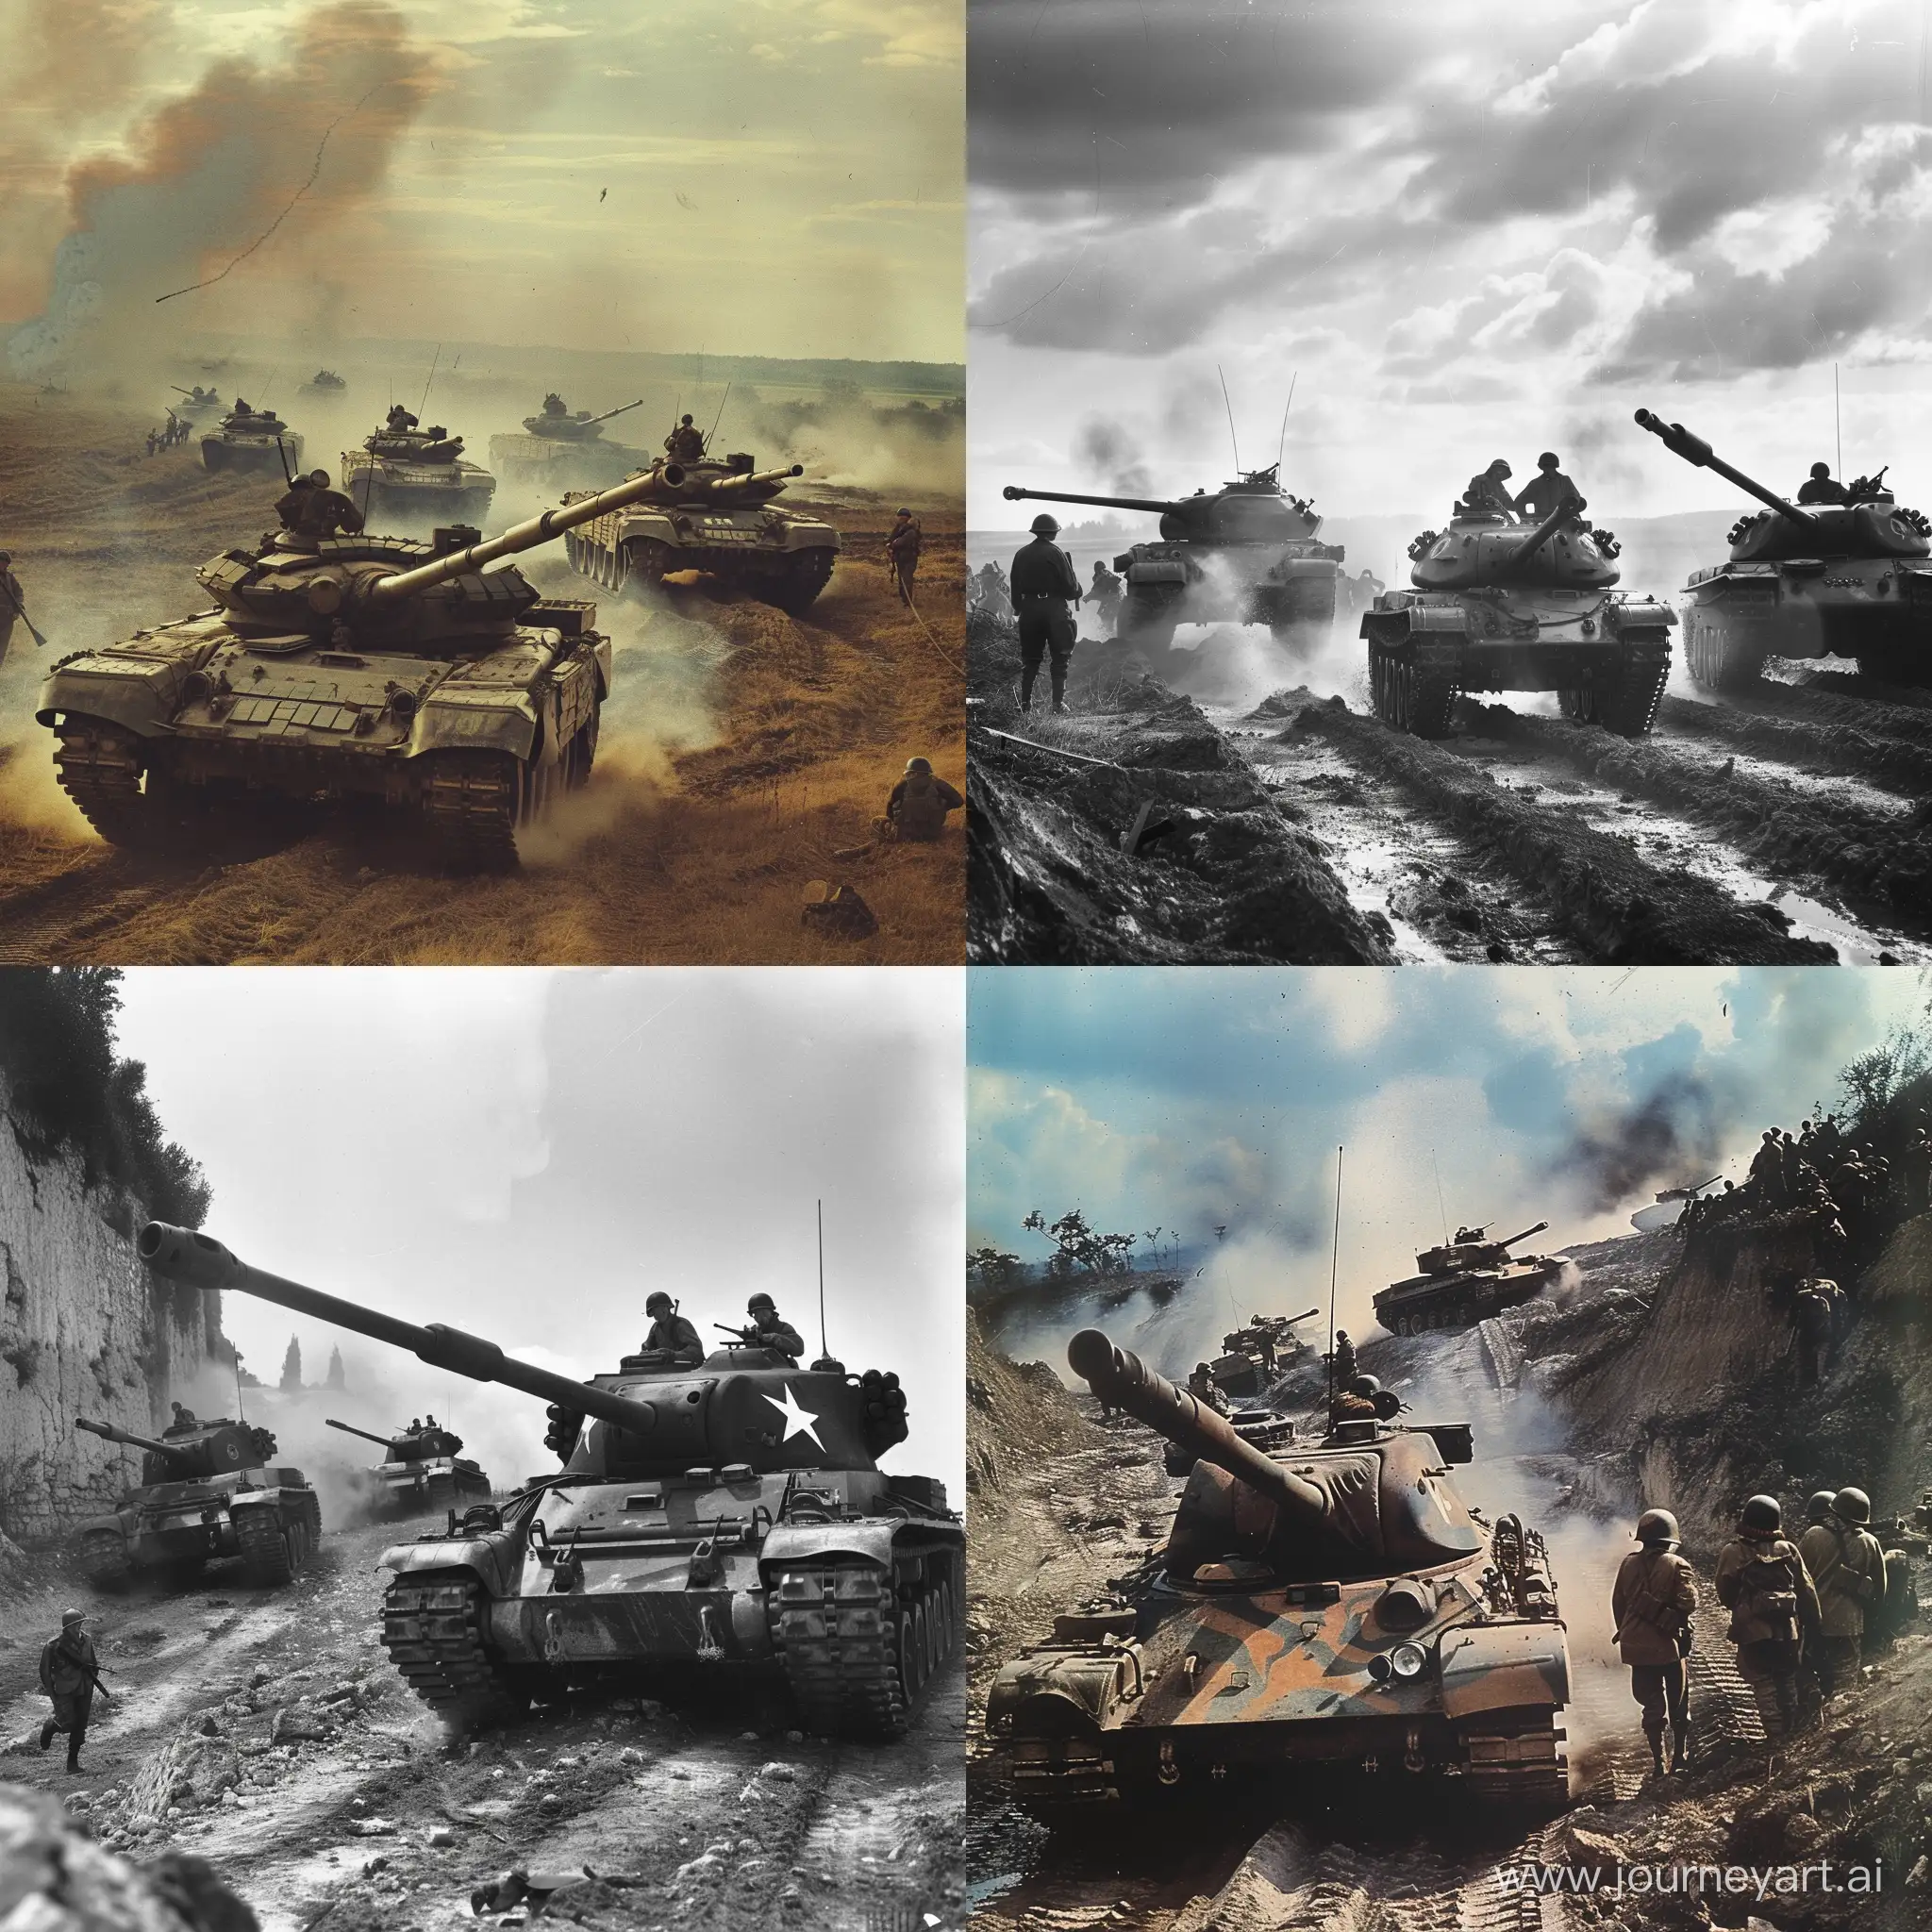 Tanks, together, at war, soldiers nearby, thunder of war